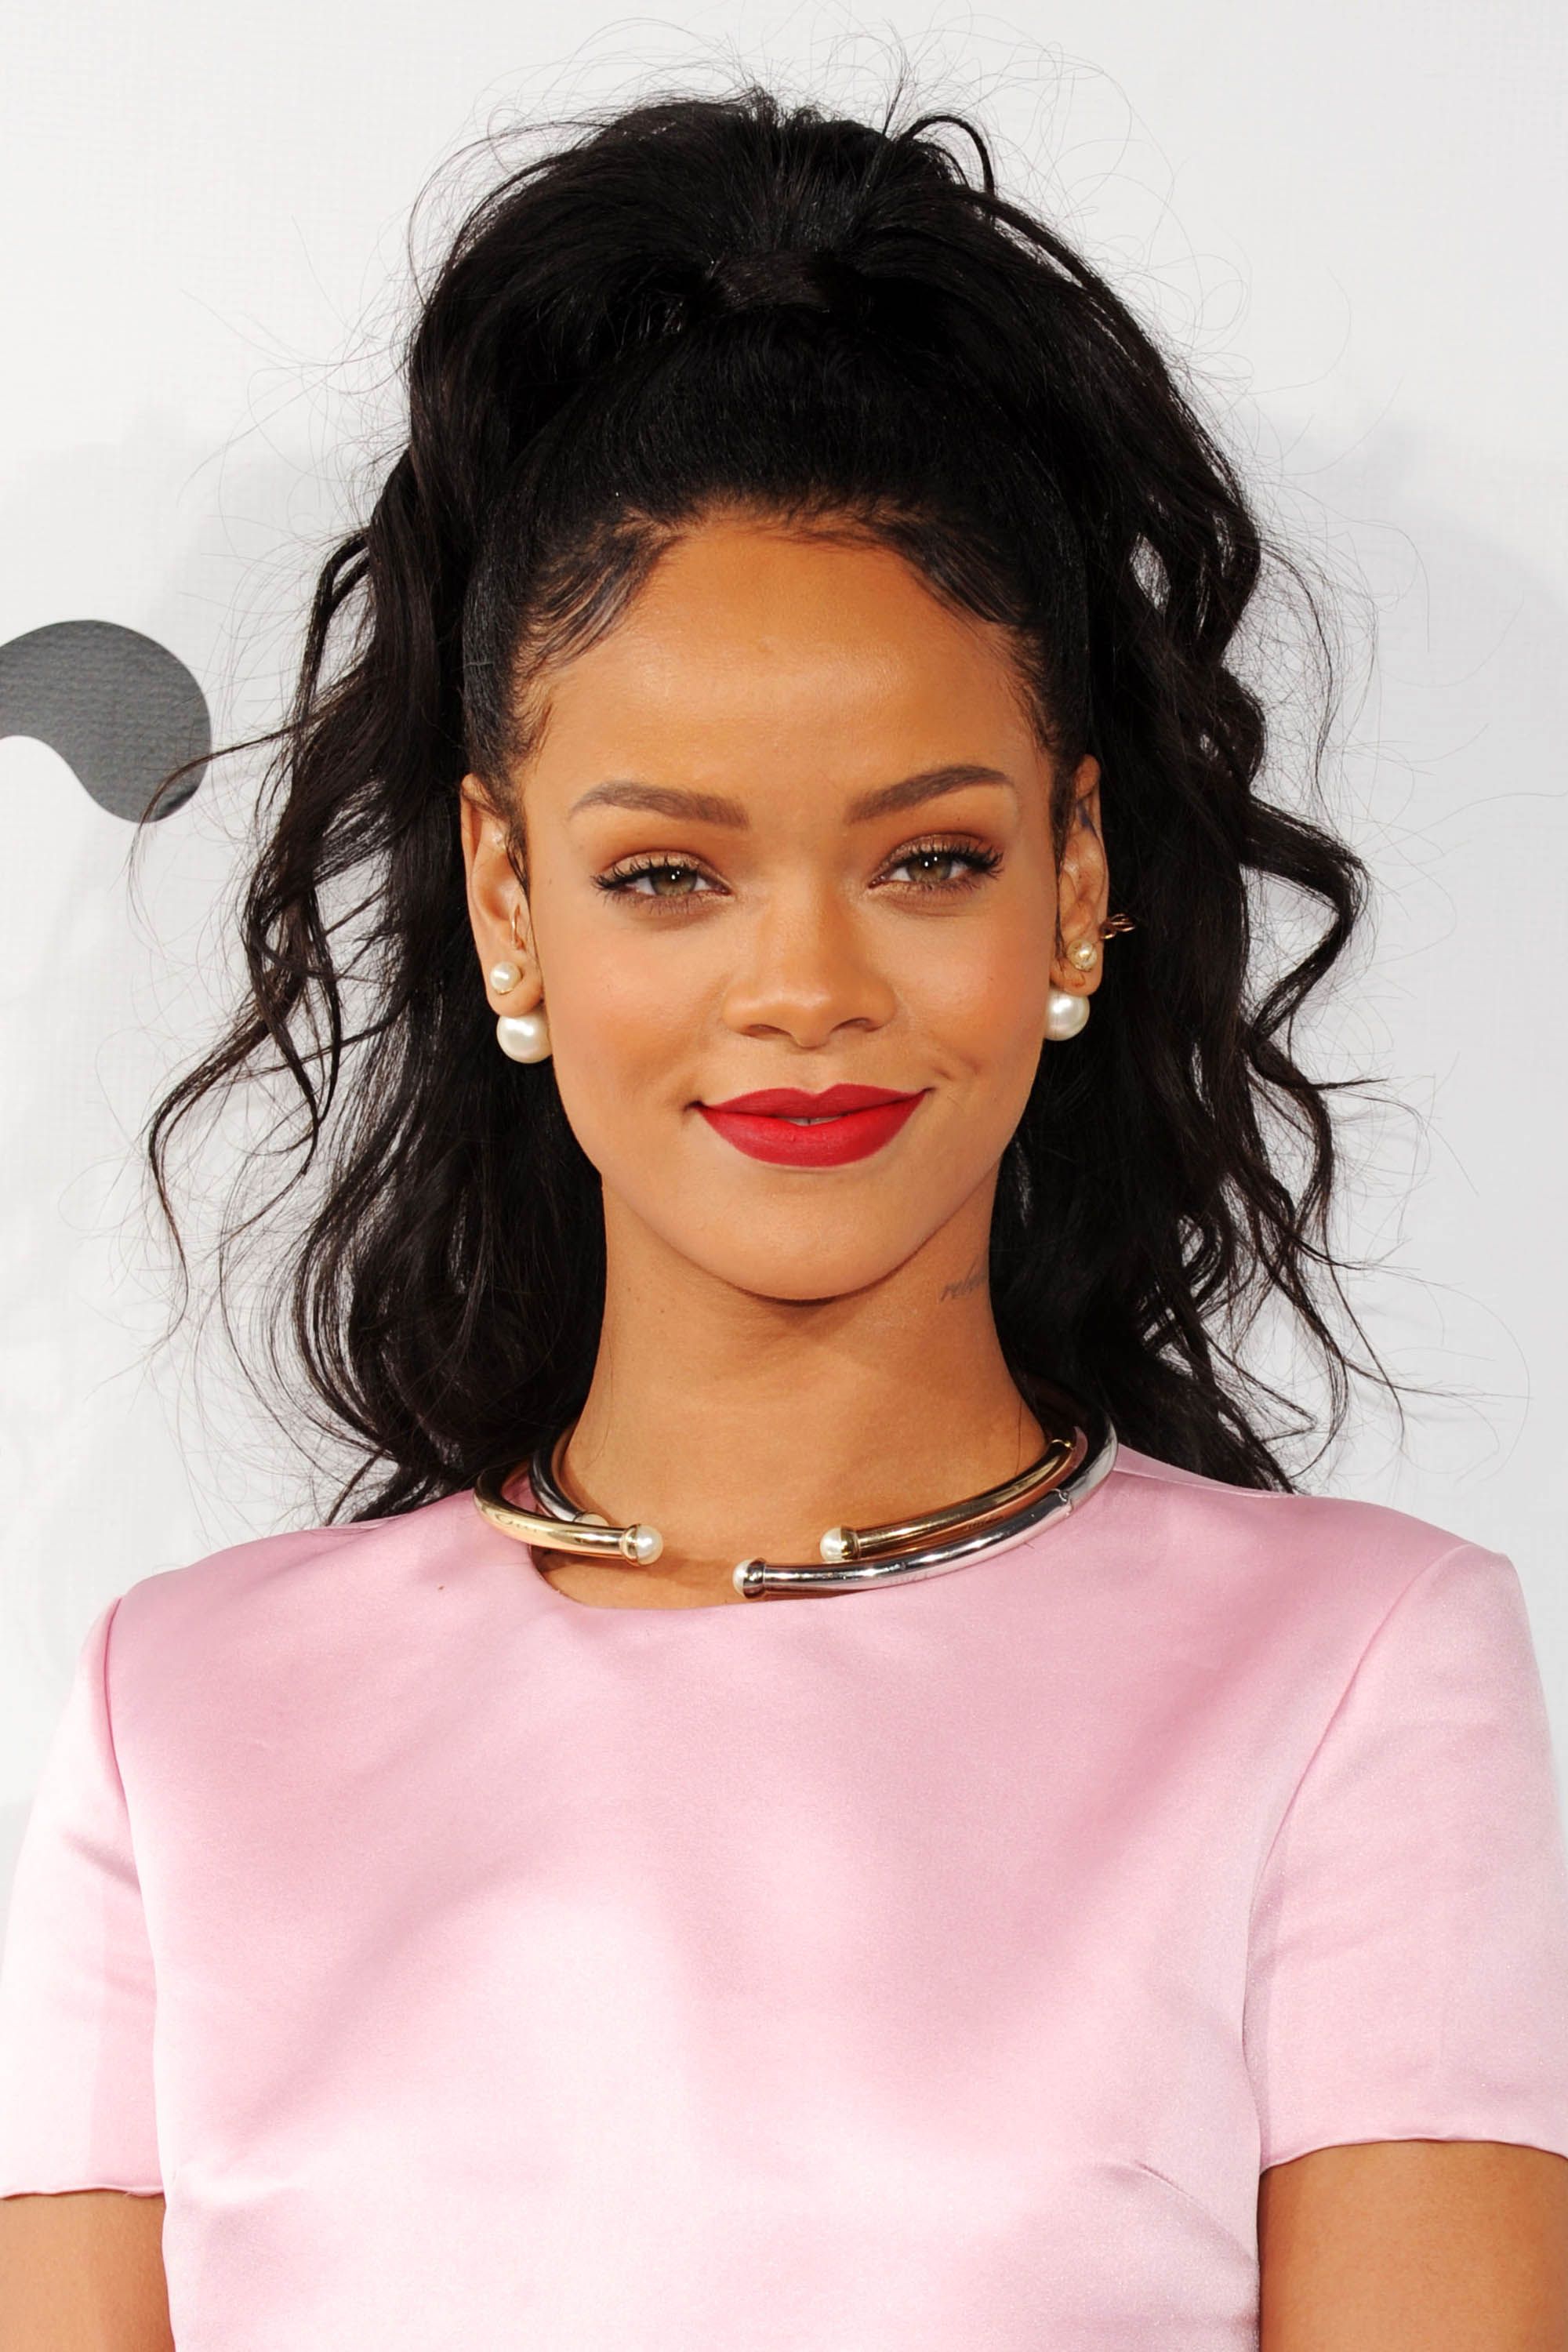 Out Of Every Rihanna Hairstyle, One Look Stands Above The Rest